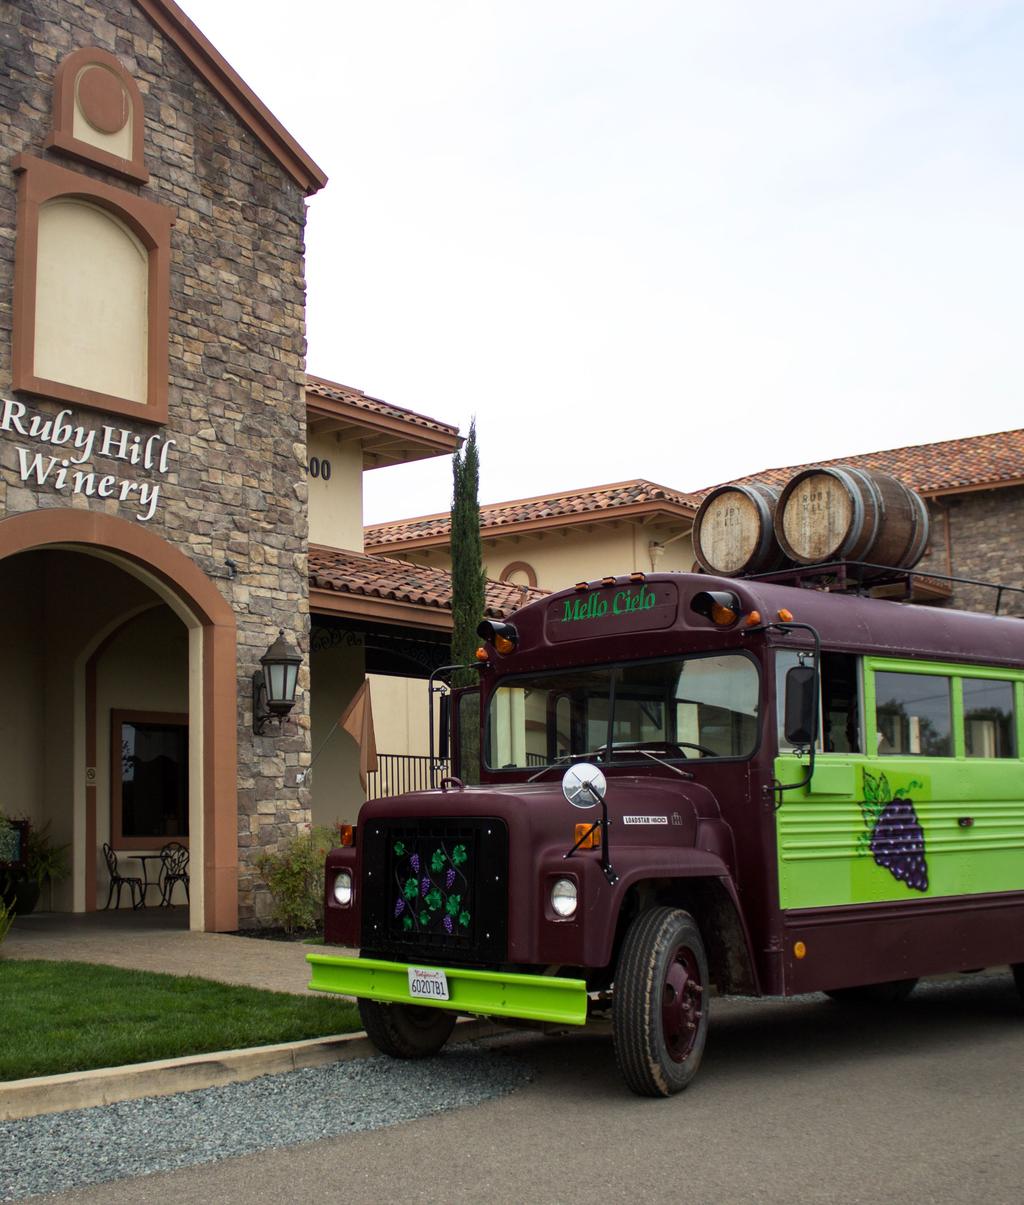 RUBY HILL WINERY